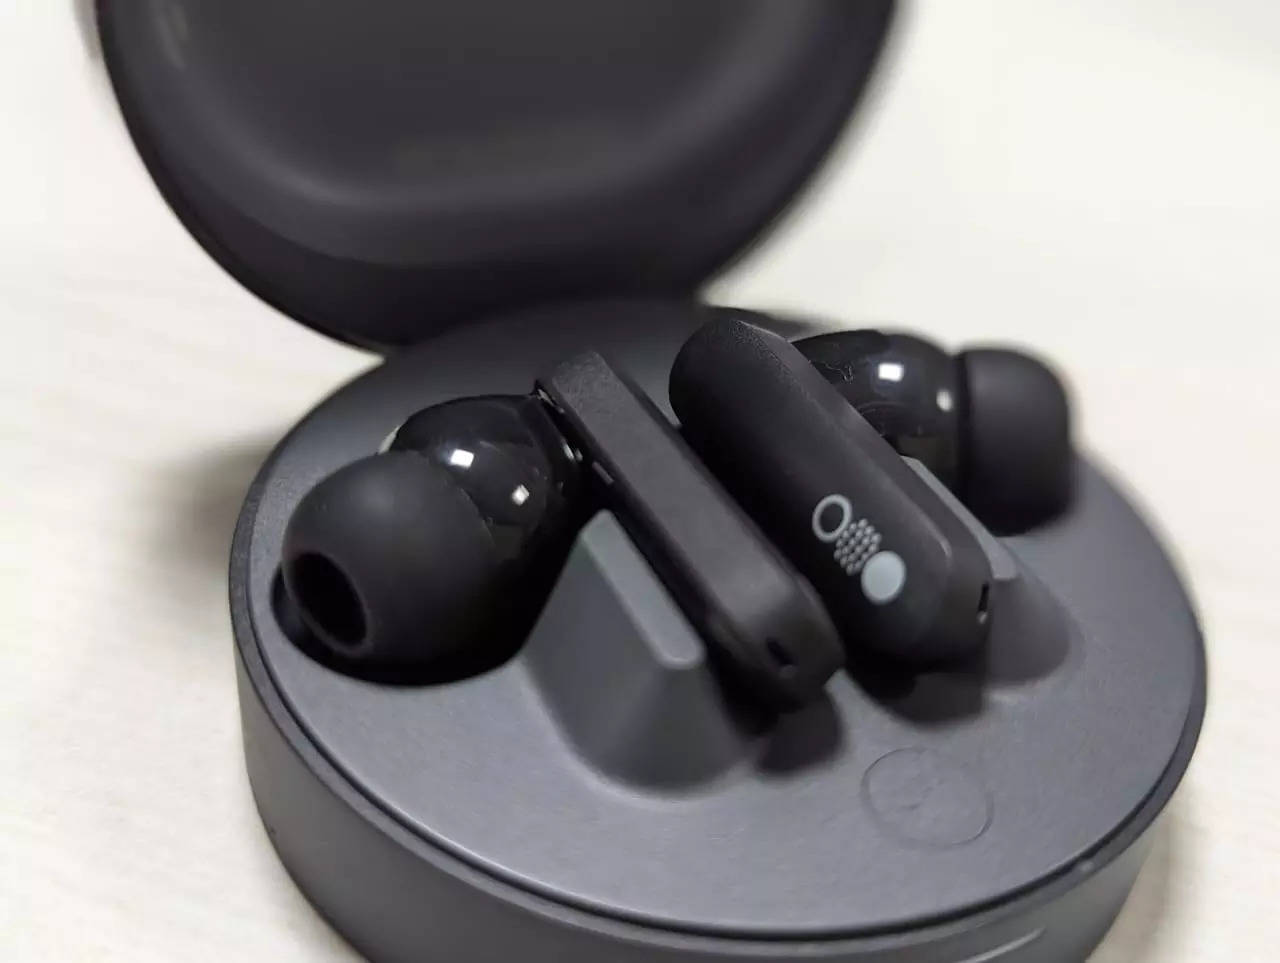 CMF Buds Pro review: Feature packed true wireless earbuds